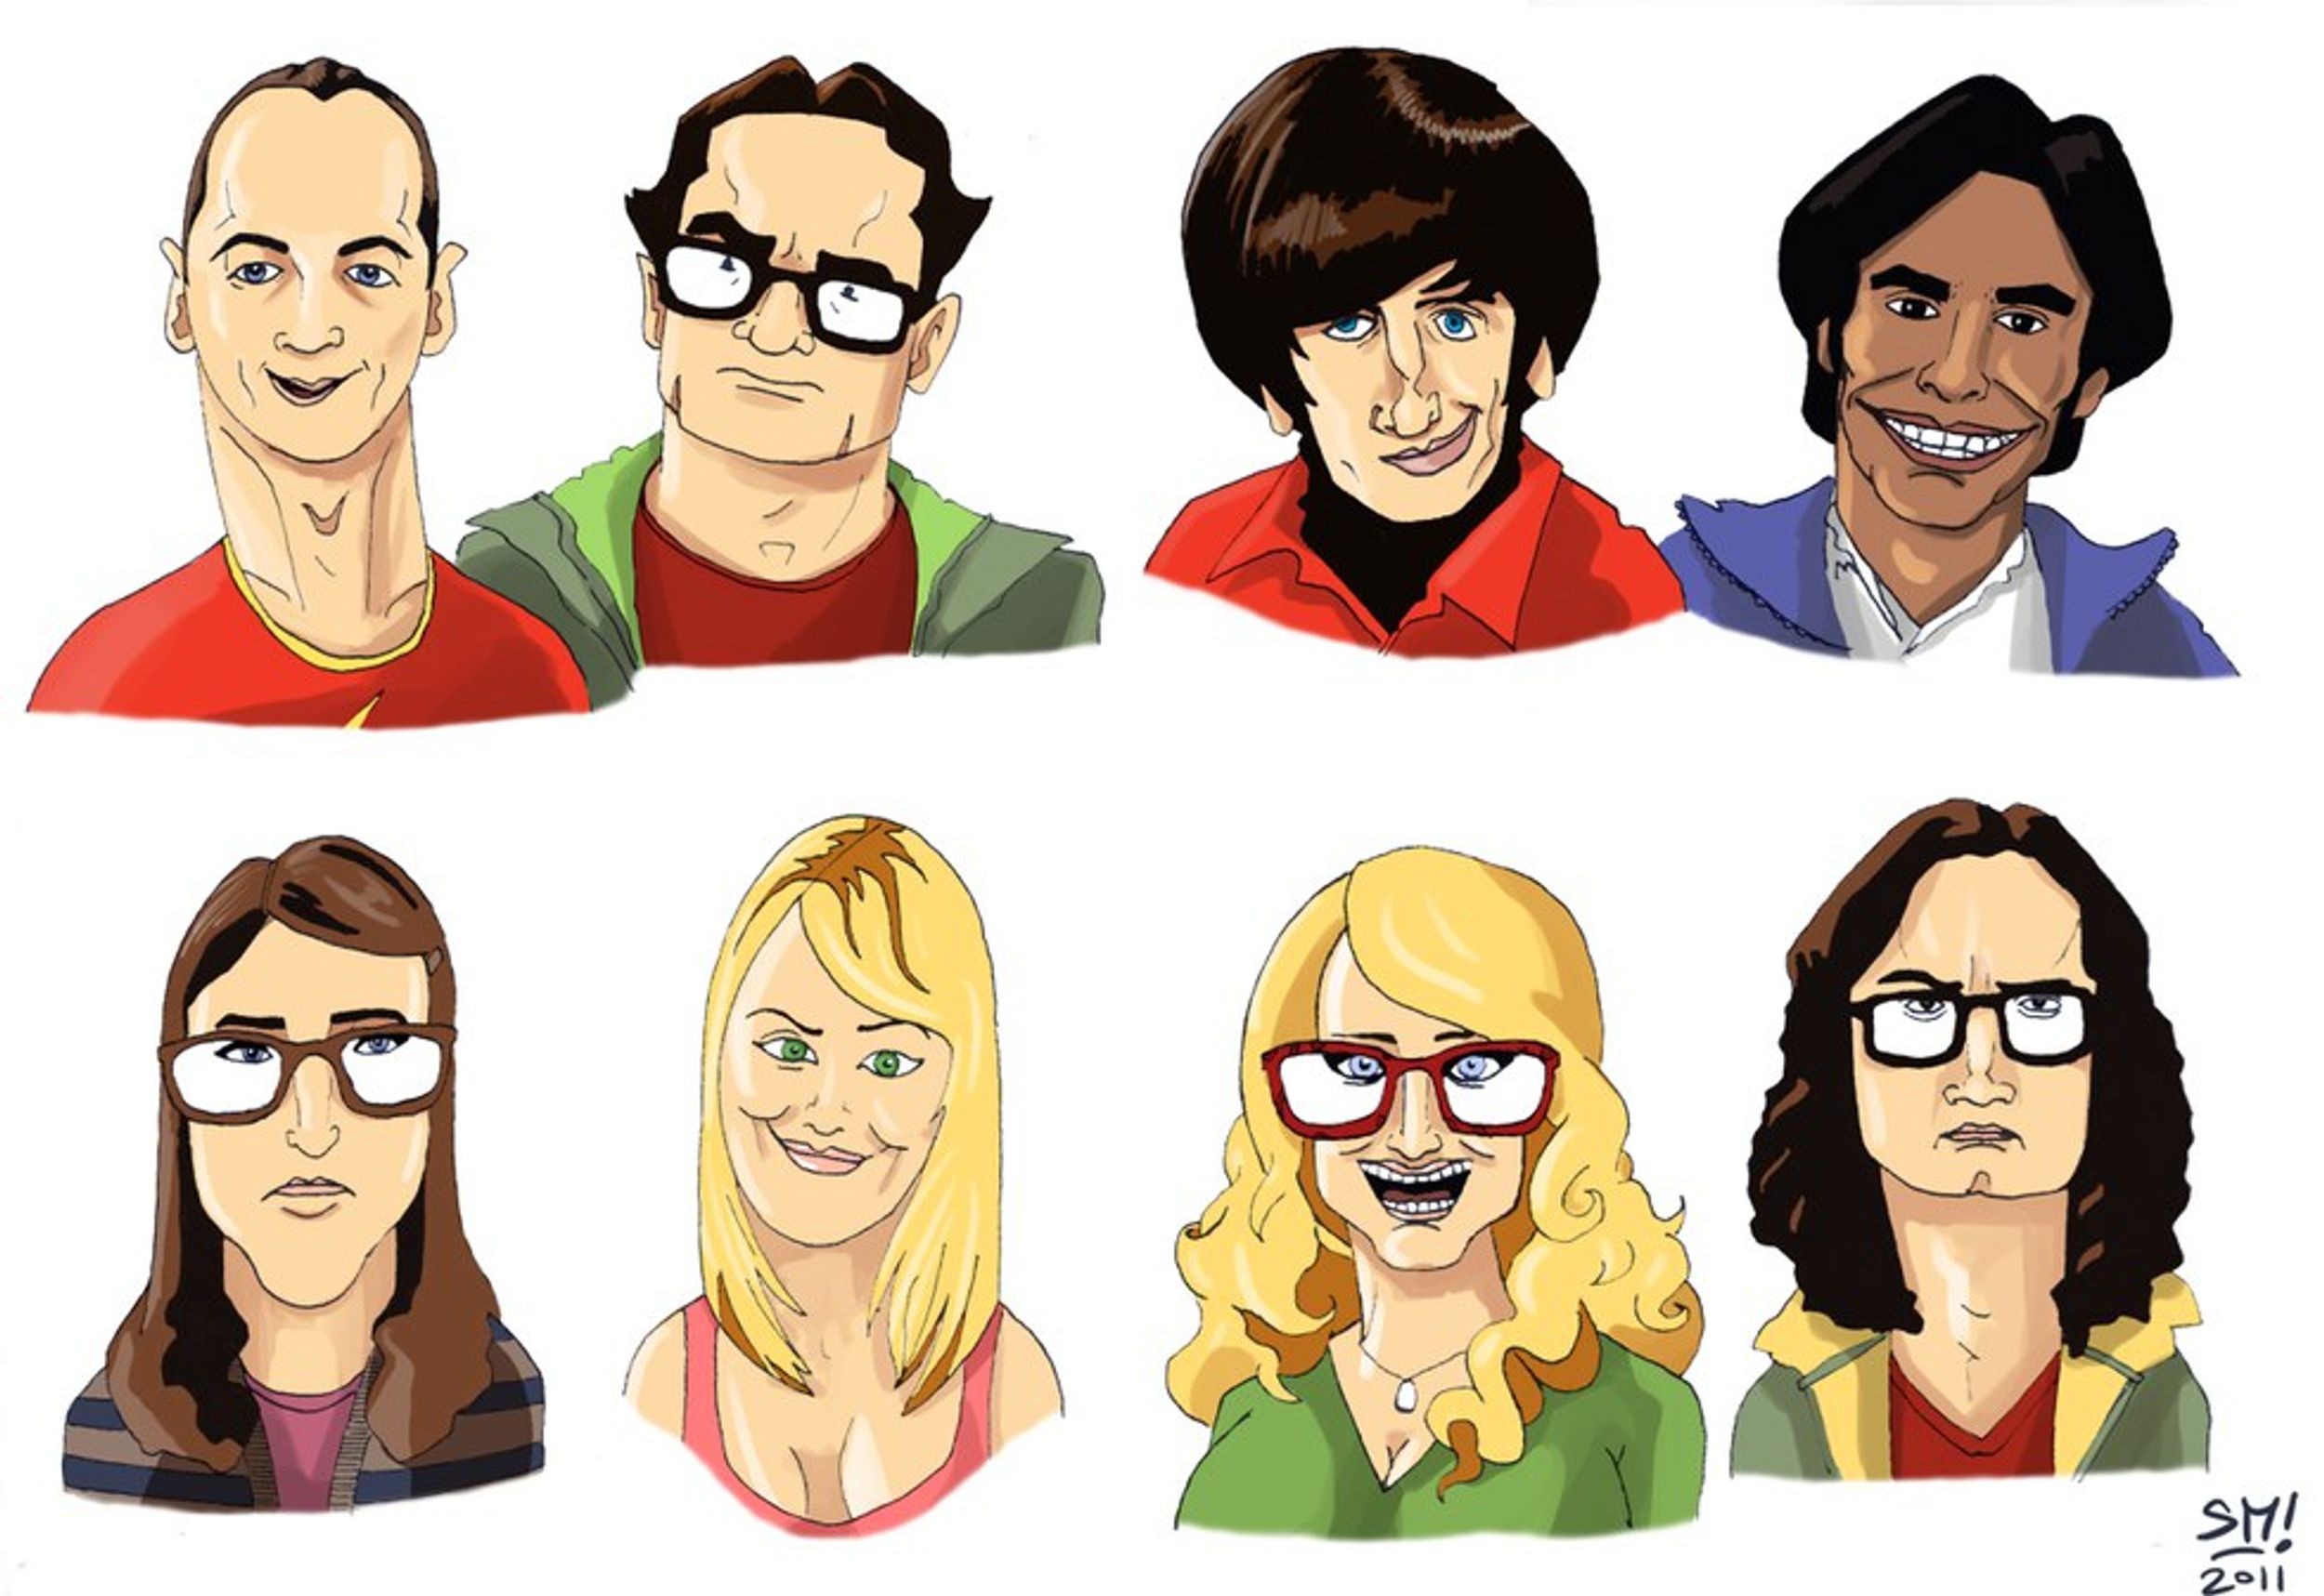 Why 'Big Bang Theory' Is Undermining Nerd Culture